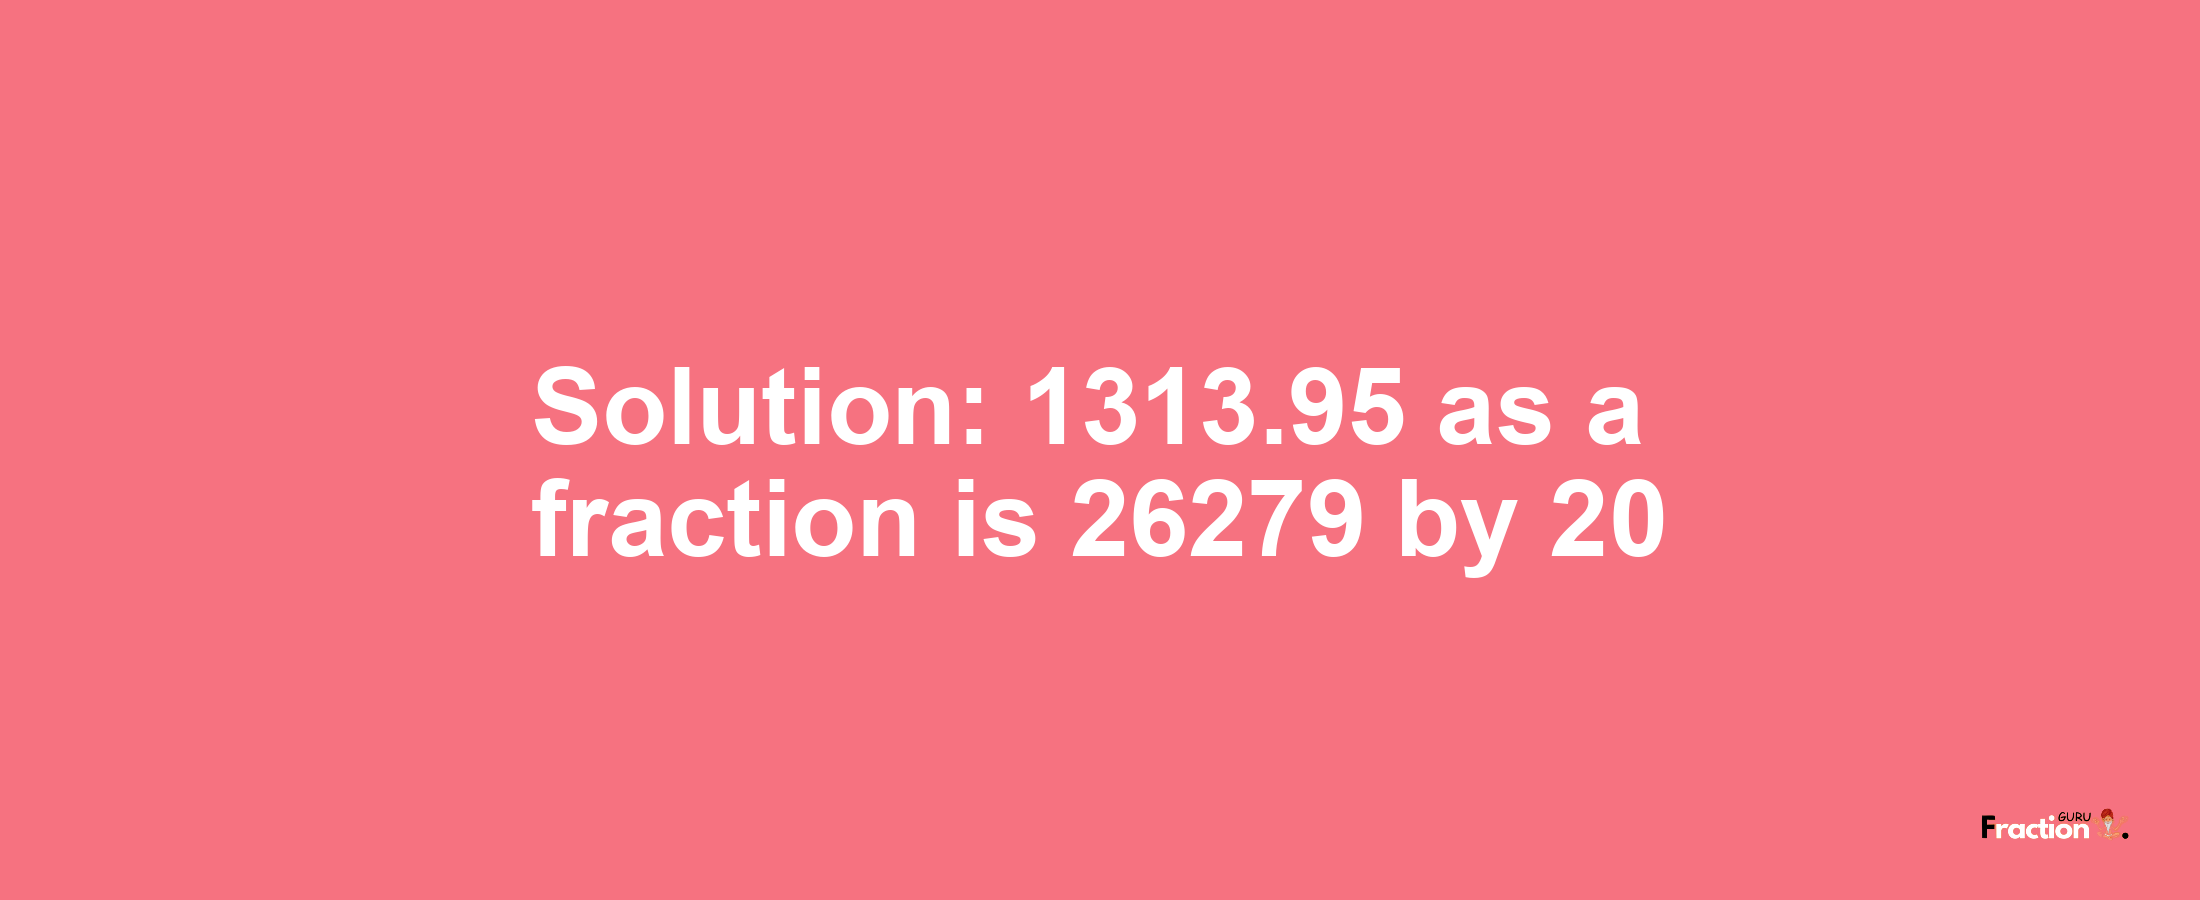 Solution:1313.95 as a fraction is 26279/20